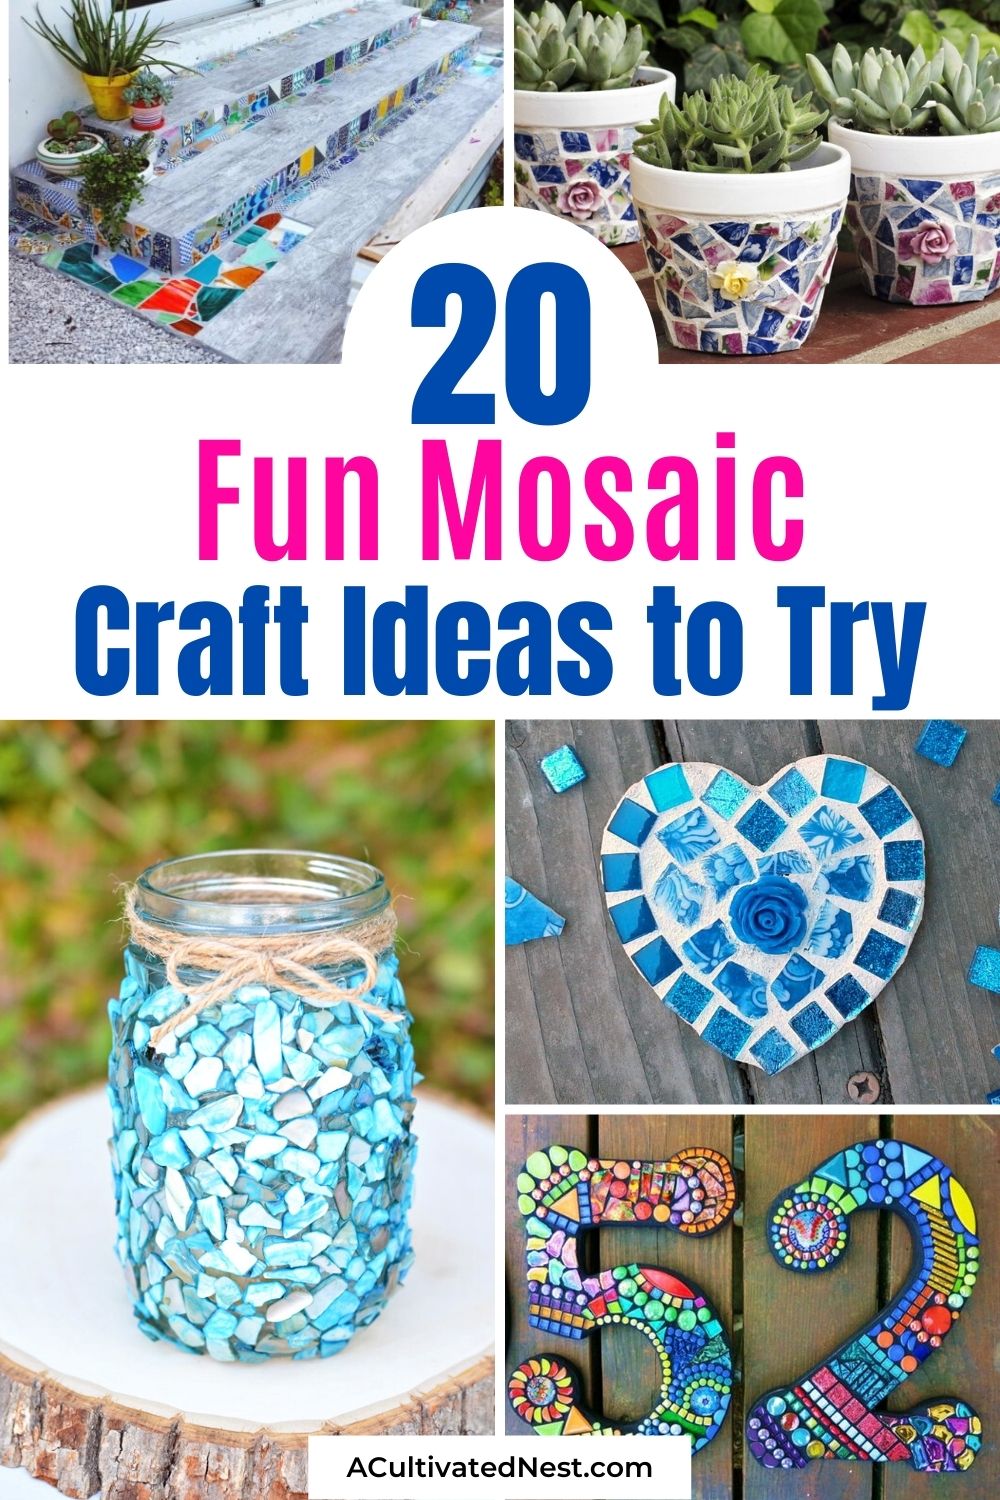 20 Fun Mosaic Craft Ideas- If you want to make some really unique and beautiful décor for your home, you need to try some of these fun mosaic craft ideas! There are so many pretty mosaic DIYs you can make! | #mosaicDIY #craftIdeas #diyProjects #DIY #ACultivatedNest